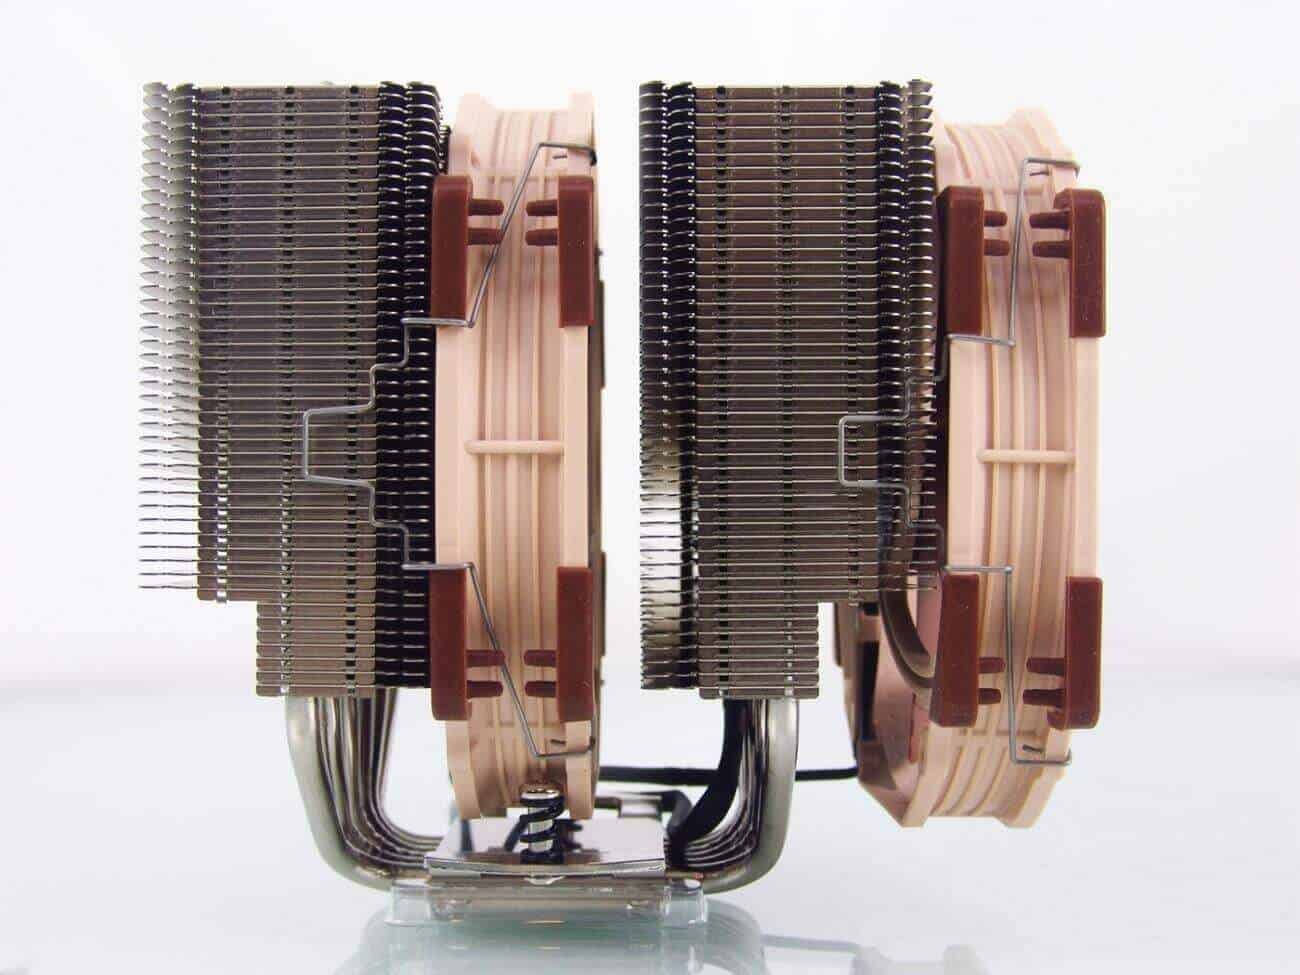 Noctua NH-D15 review: This old classic is still king of air coolers